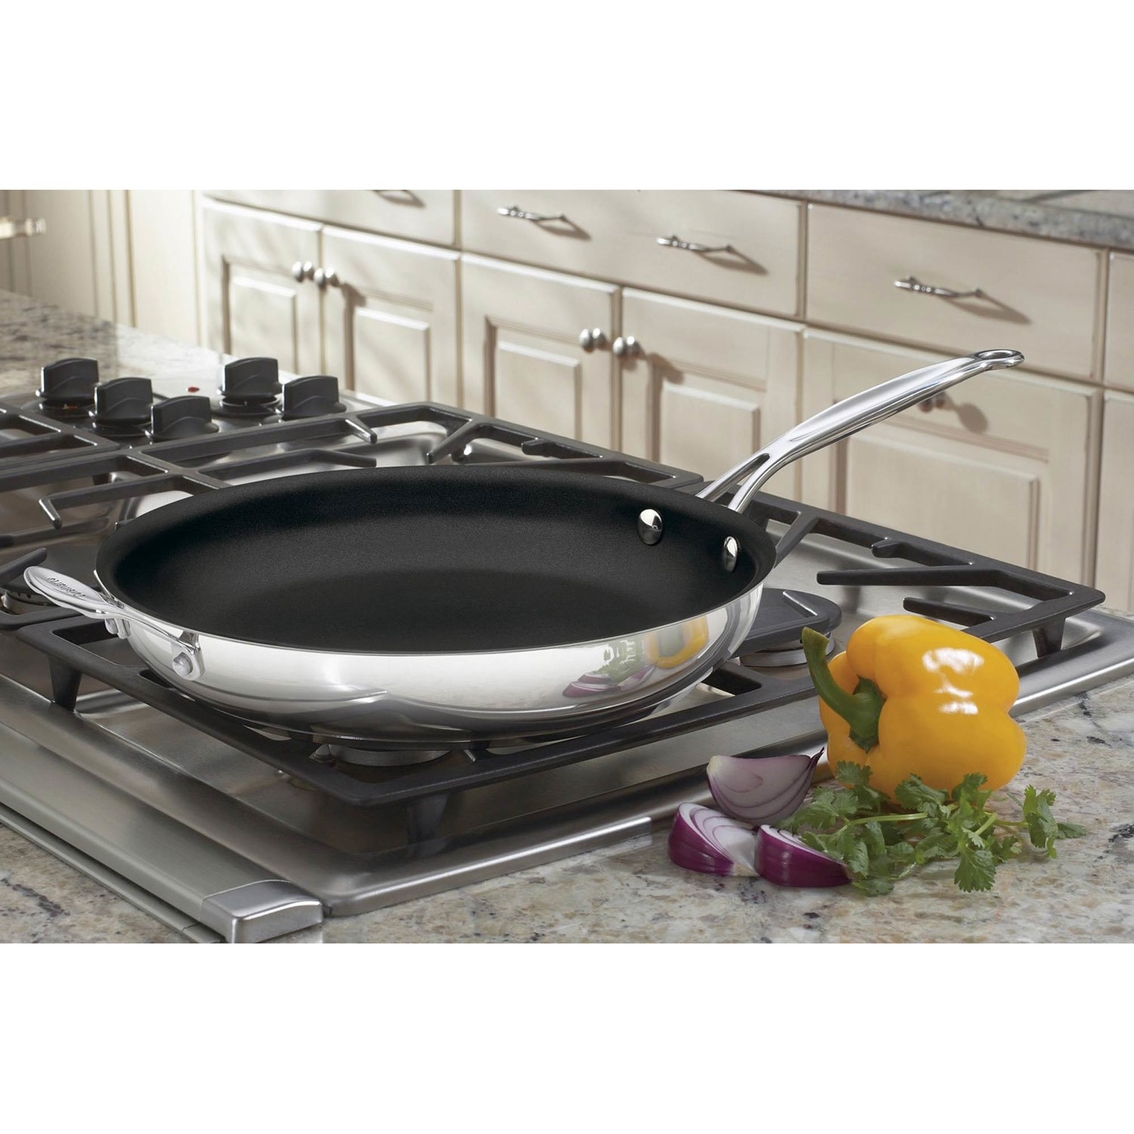 Cuisinart Chef's Classic Stainless Steel Nonstick 12 in. Skillet with Helper Handle - Image 2 of 2